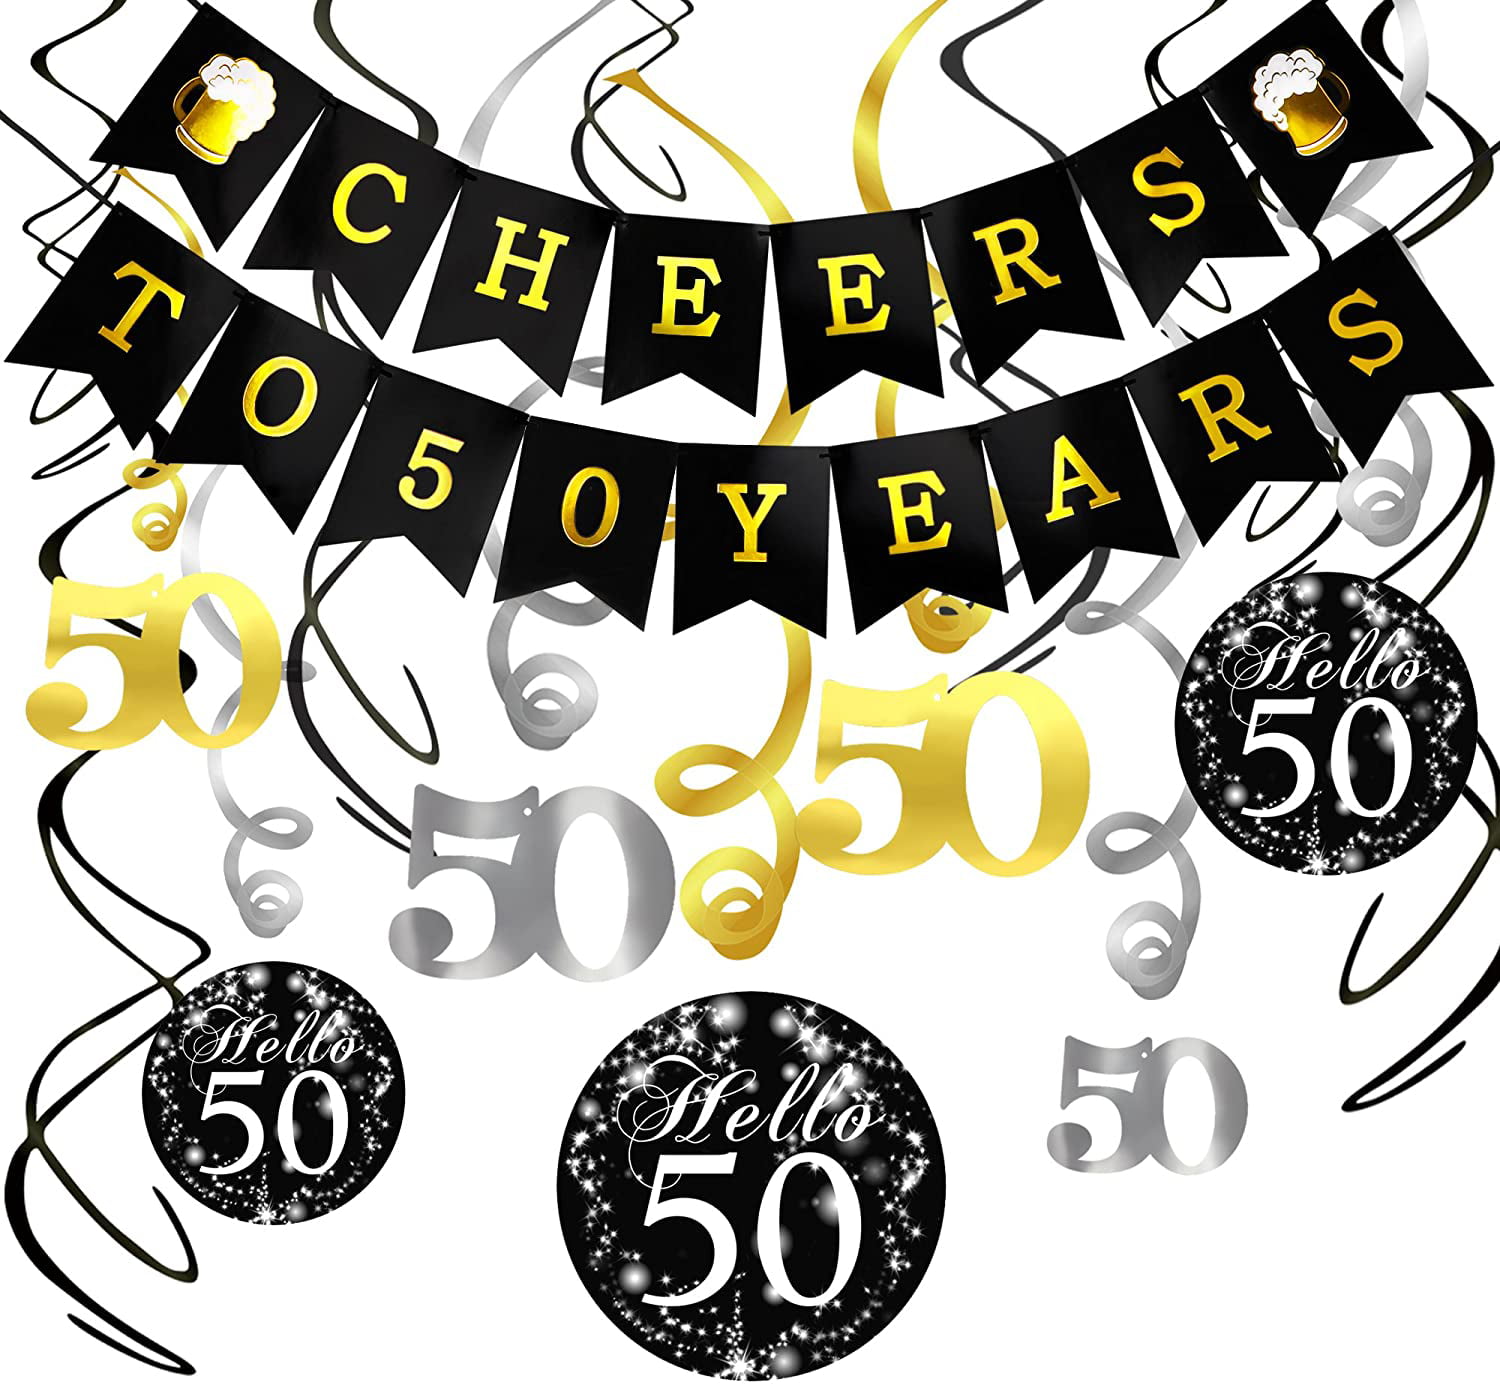 Cheers to 50 Years Bunting Garlands 50 Years Old Birthday/Anniversary Party Decoration Supplies Pre-Strung Sliver Glitter Happy 50th Birthday Banner